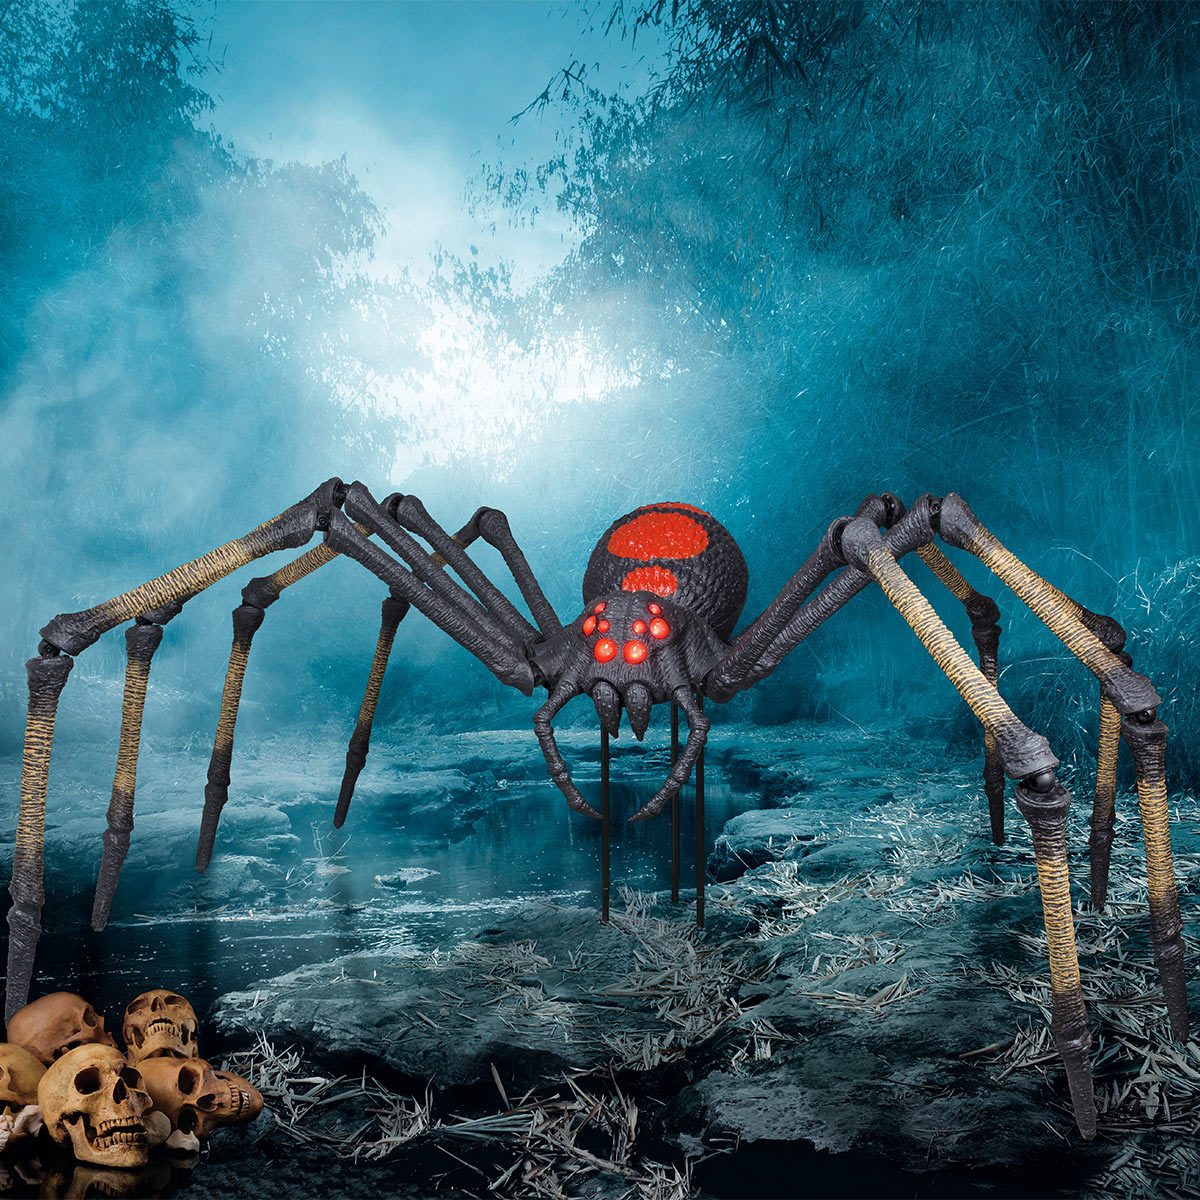 Halloween 4ft (1.2m) Giant Mutant Spider with Lights & Sounds